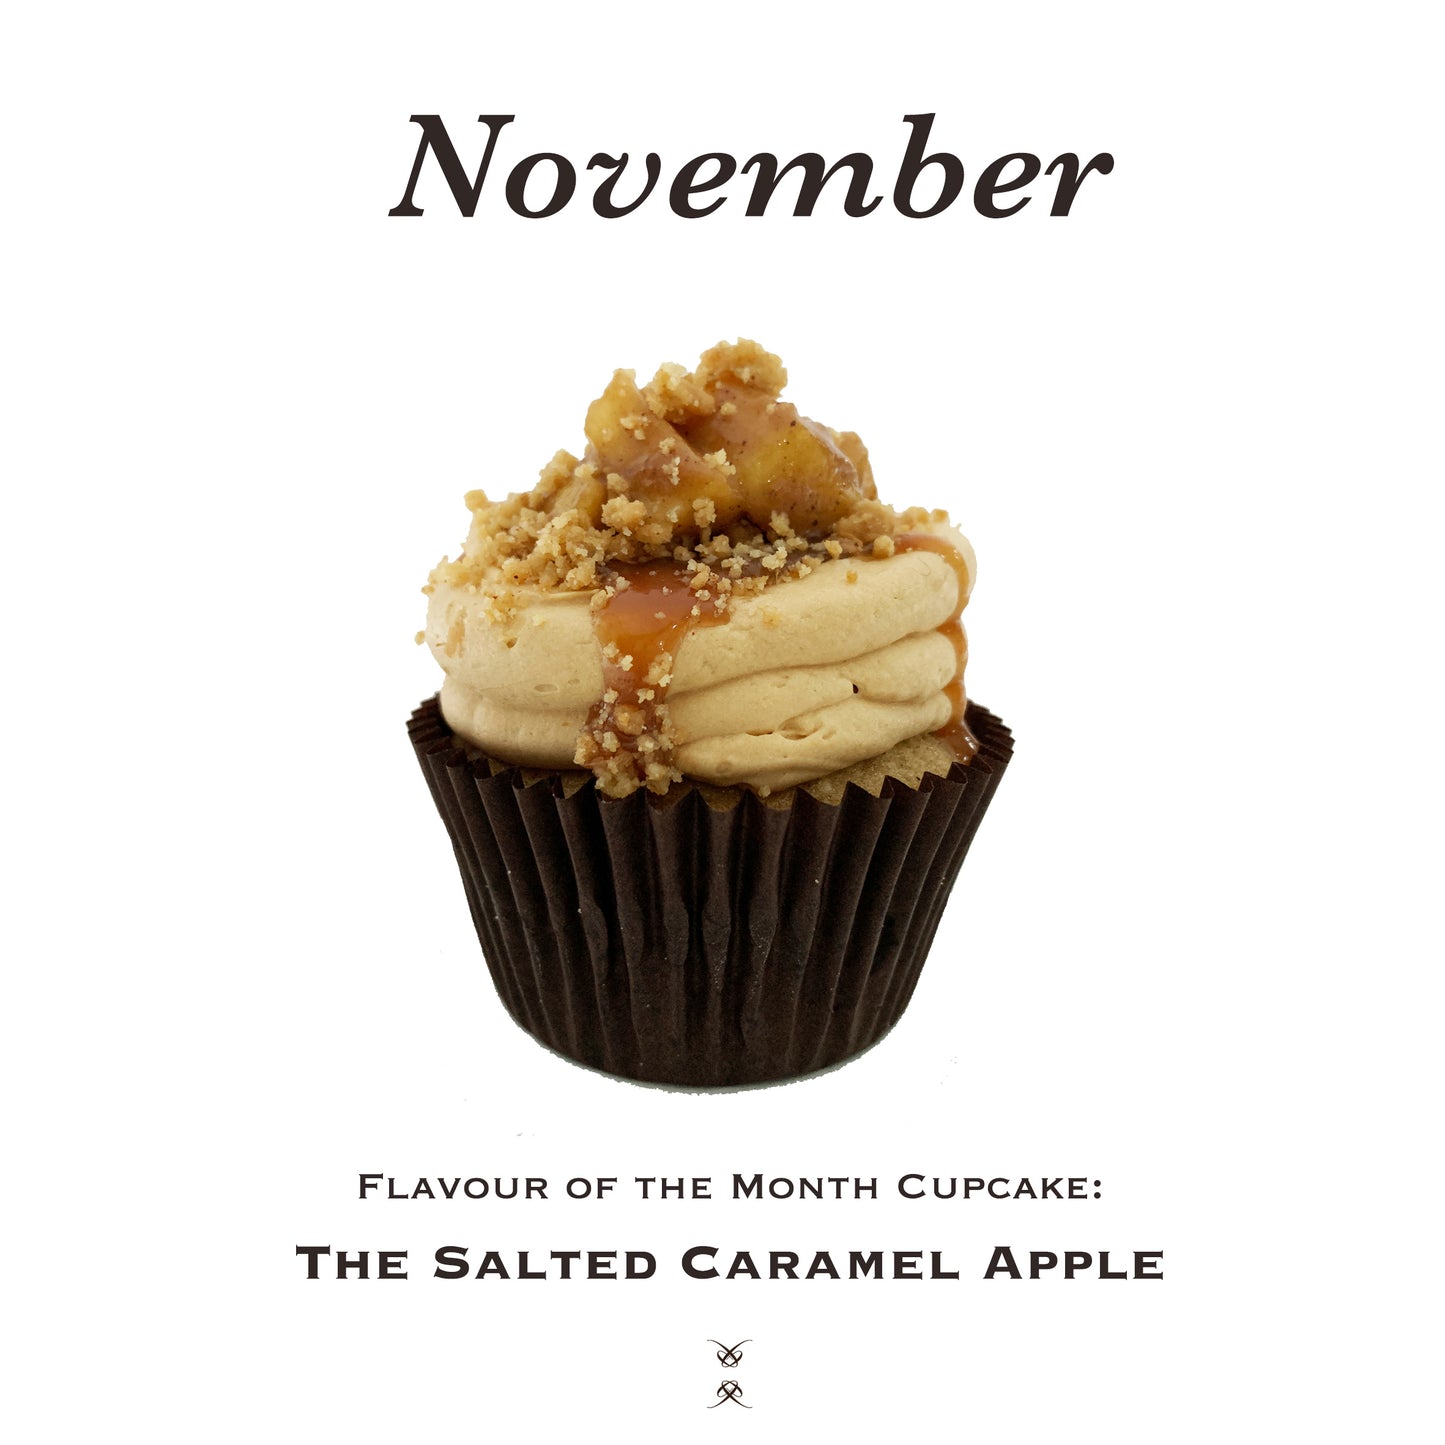 The November 2022 Flavour of the Month Cupcake: The Salted Caramel Apple